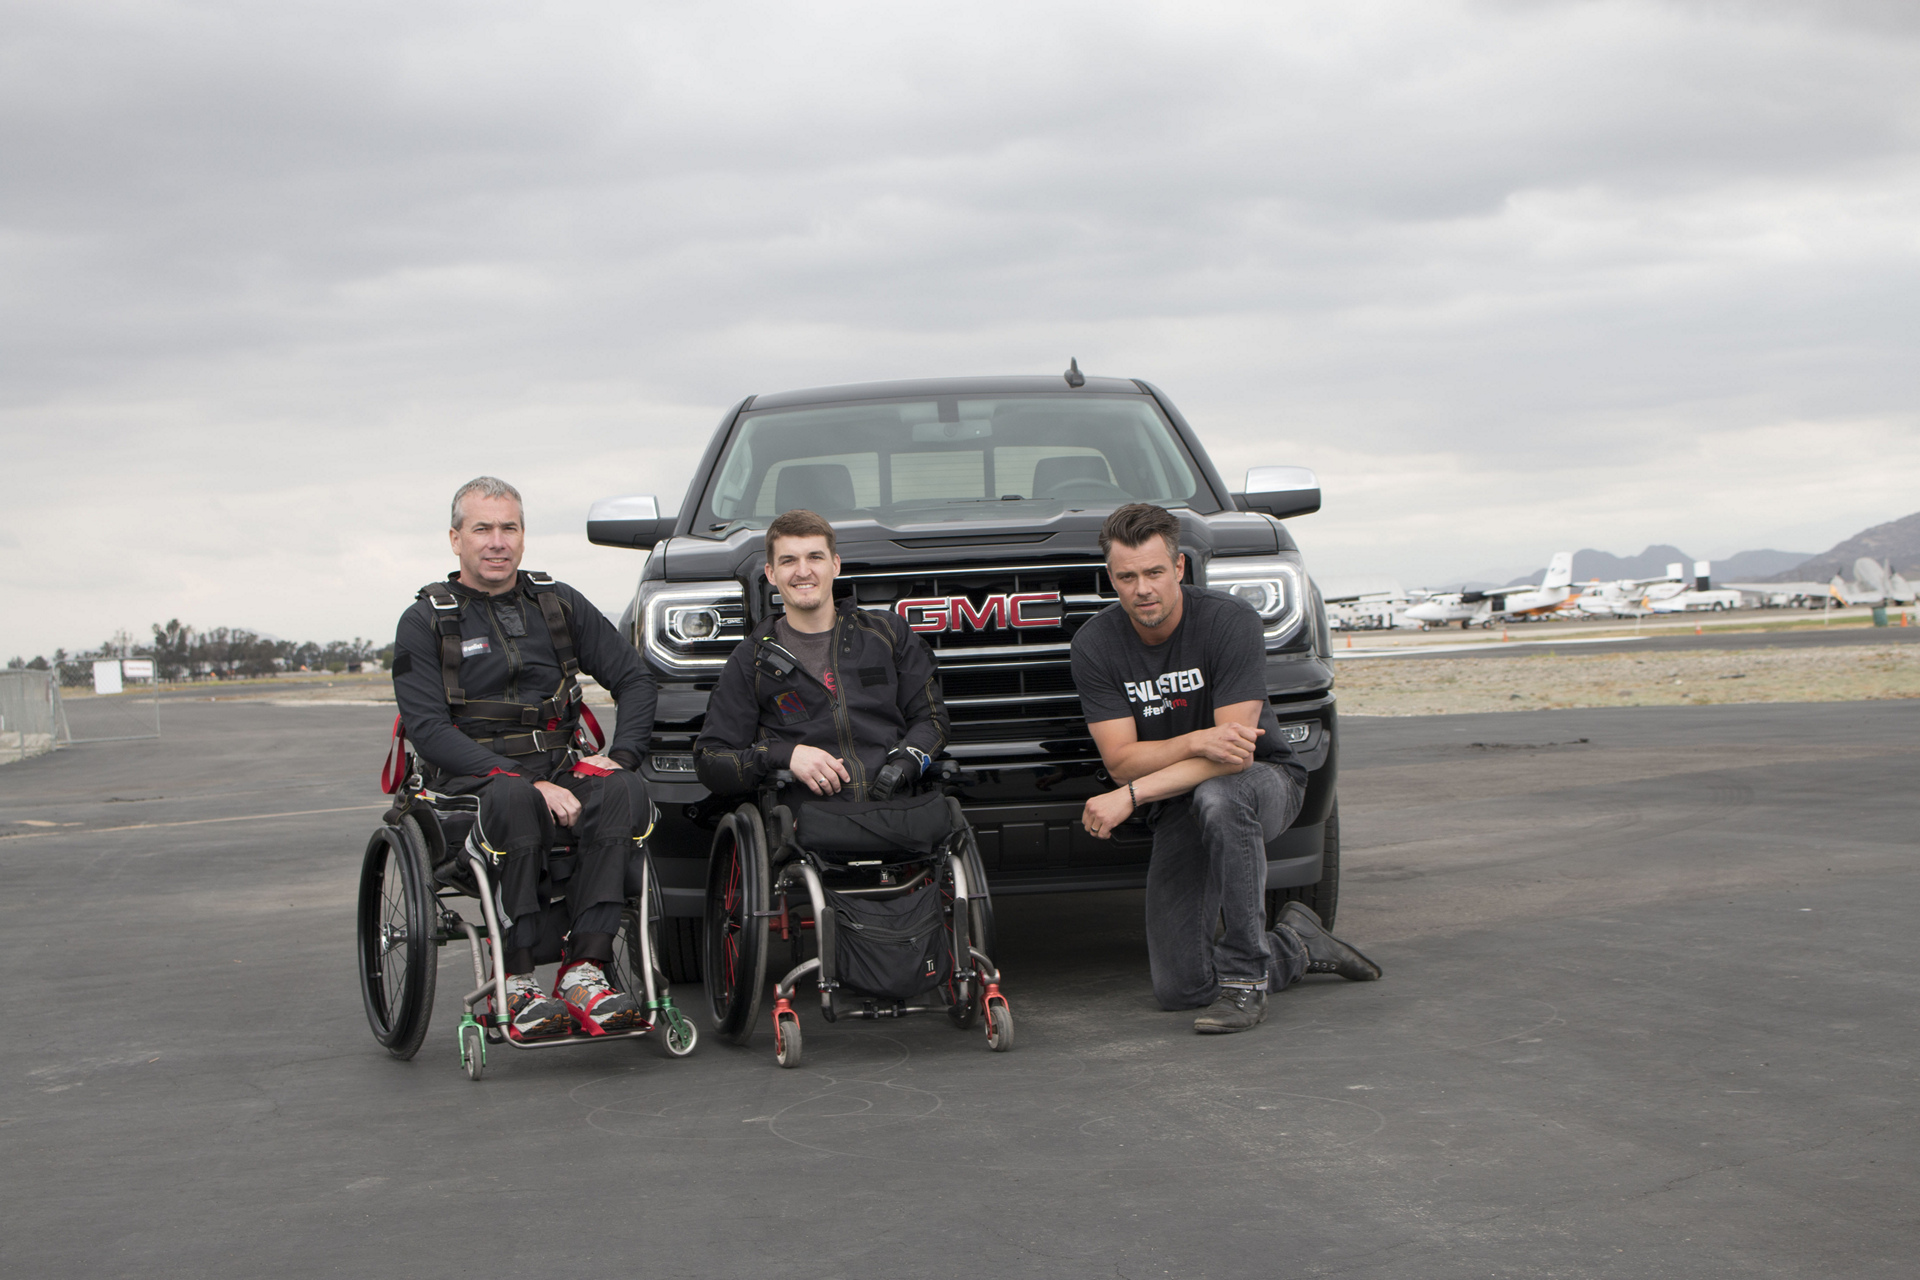 Army Staff Sergeant Stephen Valyou and Marine Corporal Todd Love with Josh Duhamel © General Motors